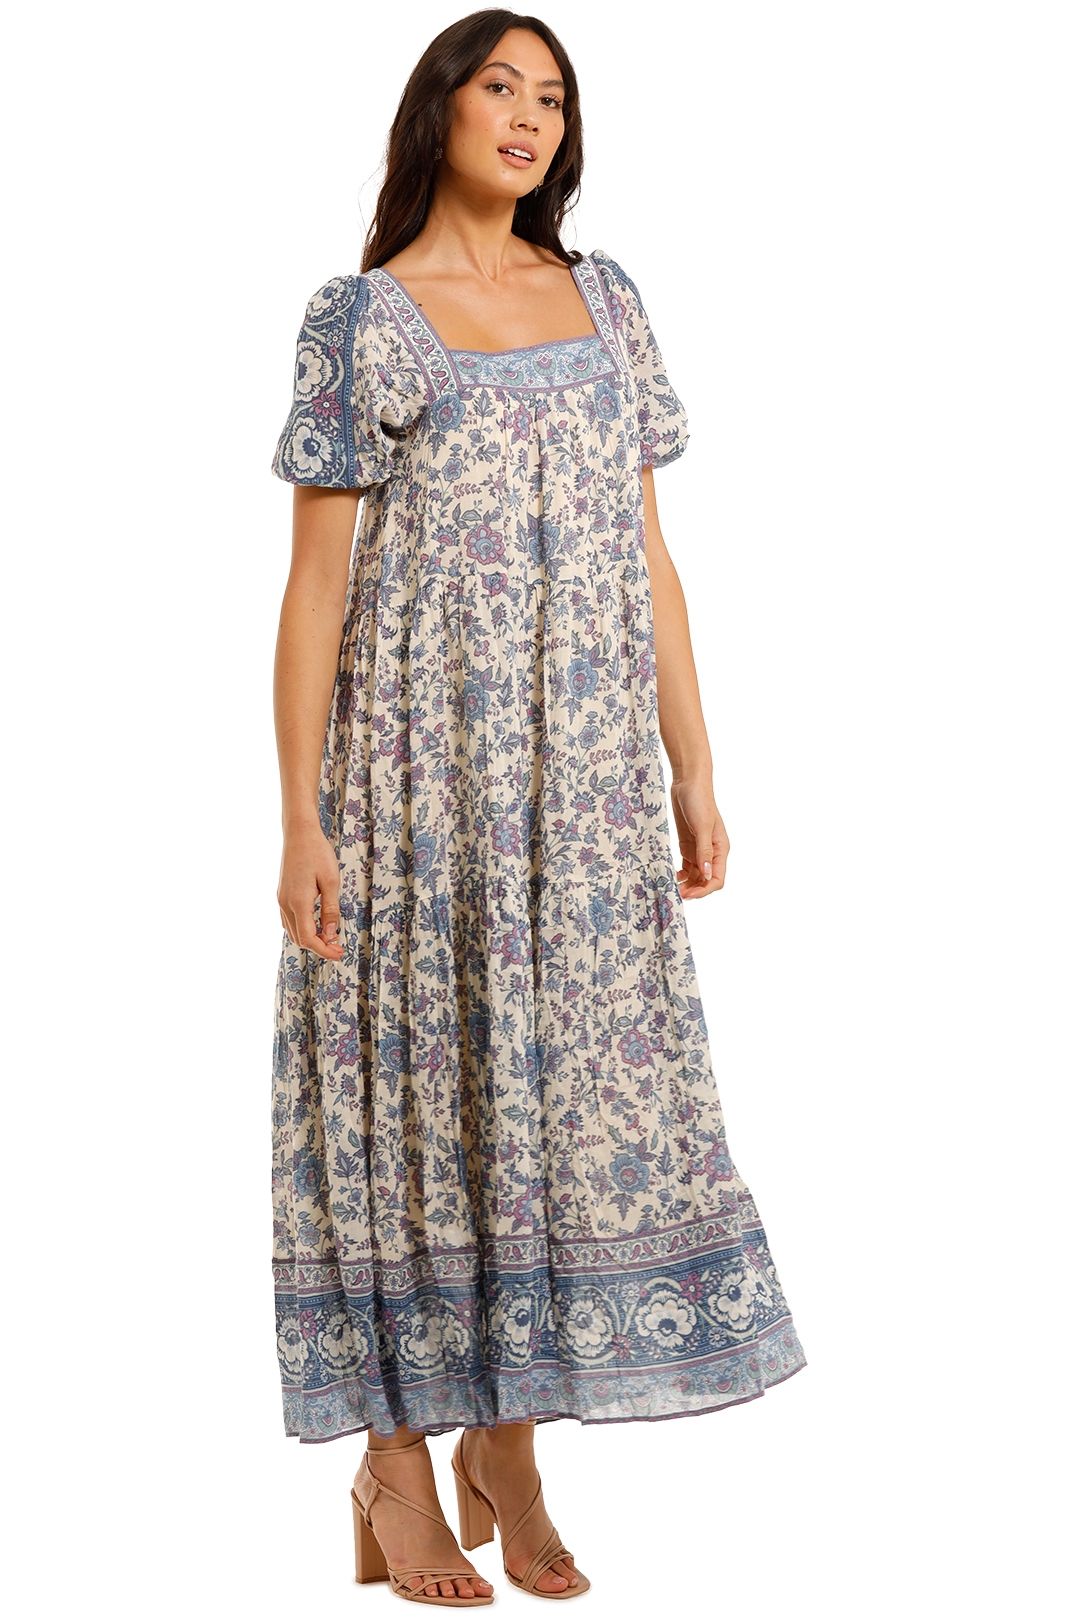 Spell Folk Song Square Neck Gown Sky Maxi